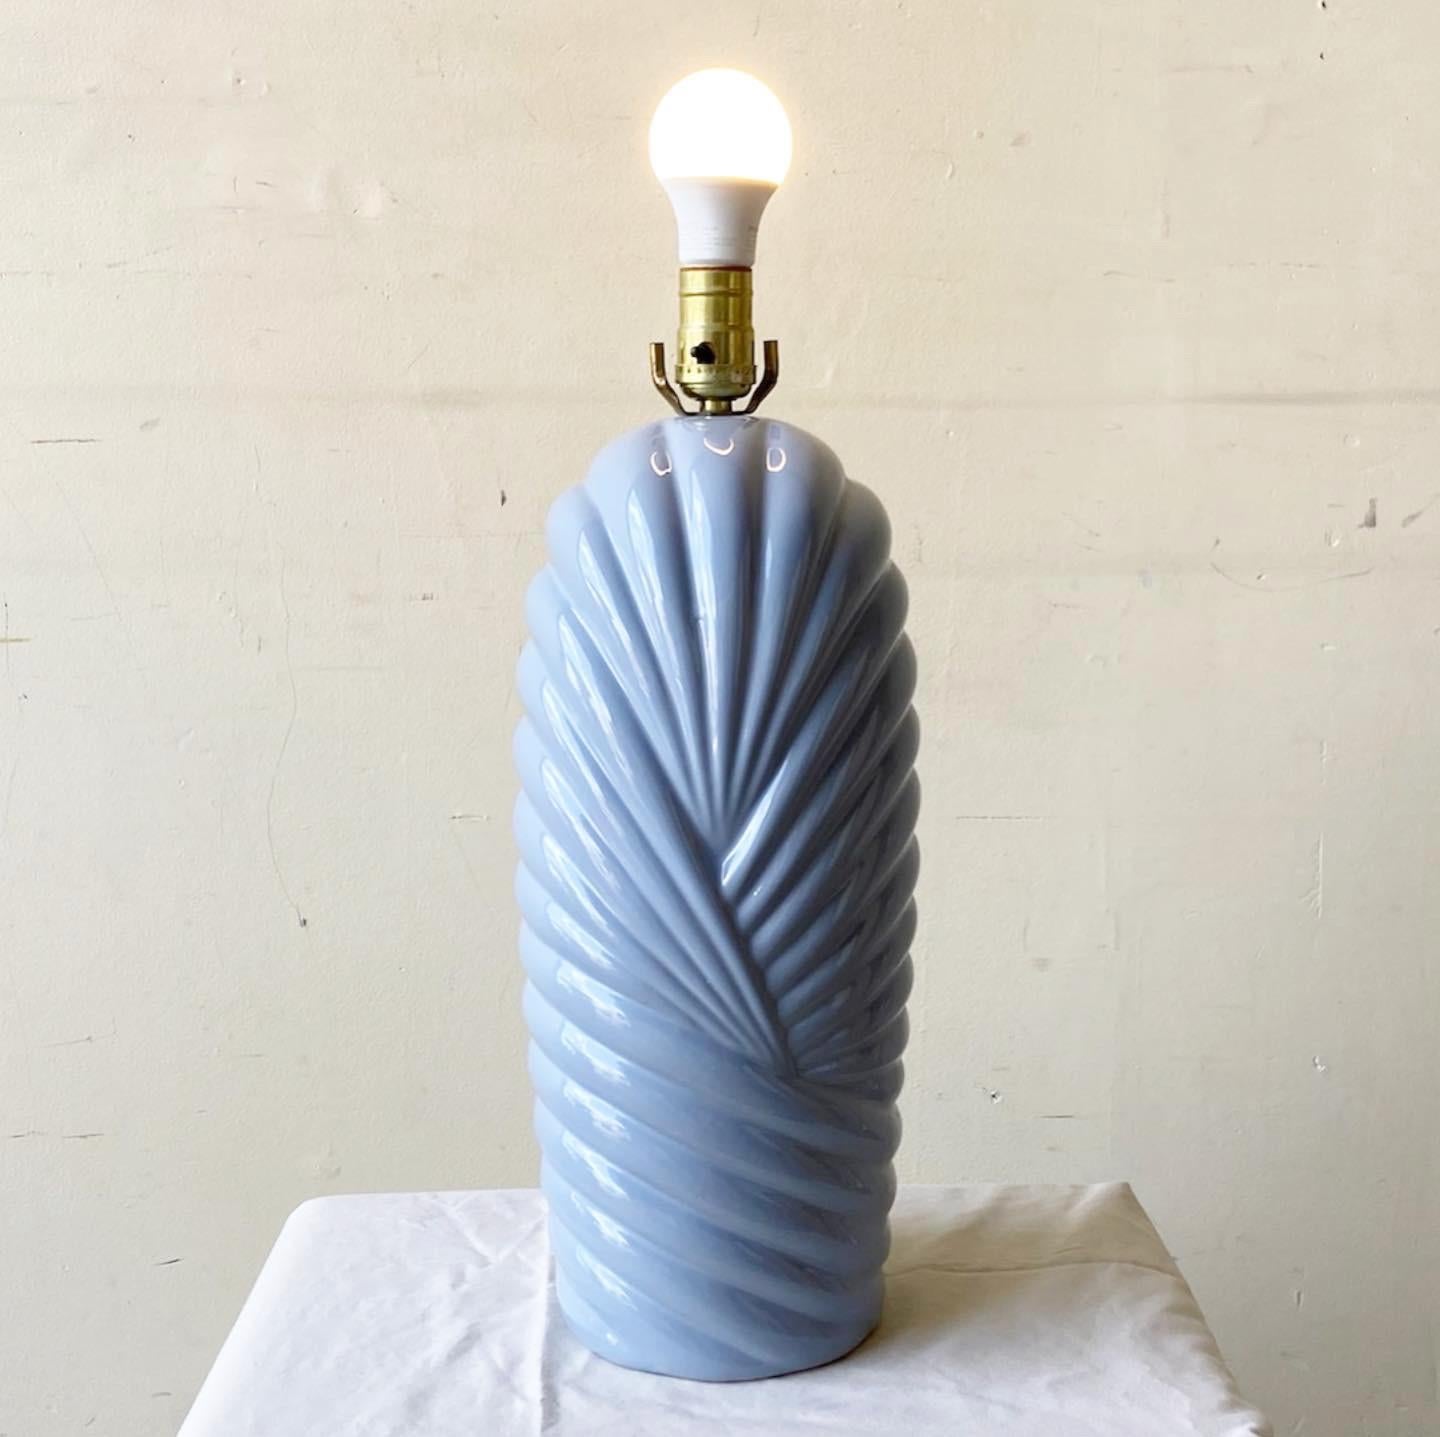 Incredible postmodern ceramic table lamp. Features a sculpted body with a gray gloss finish.
